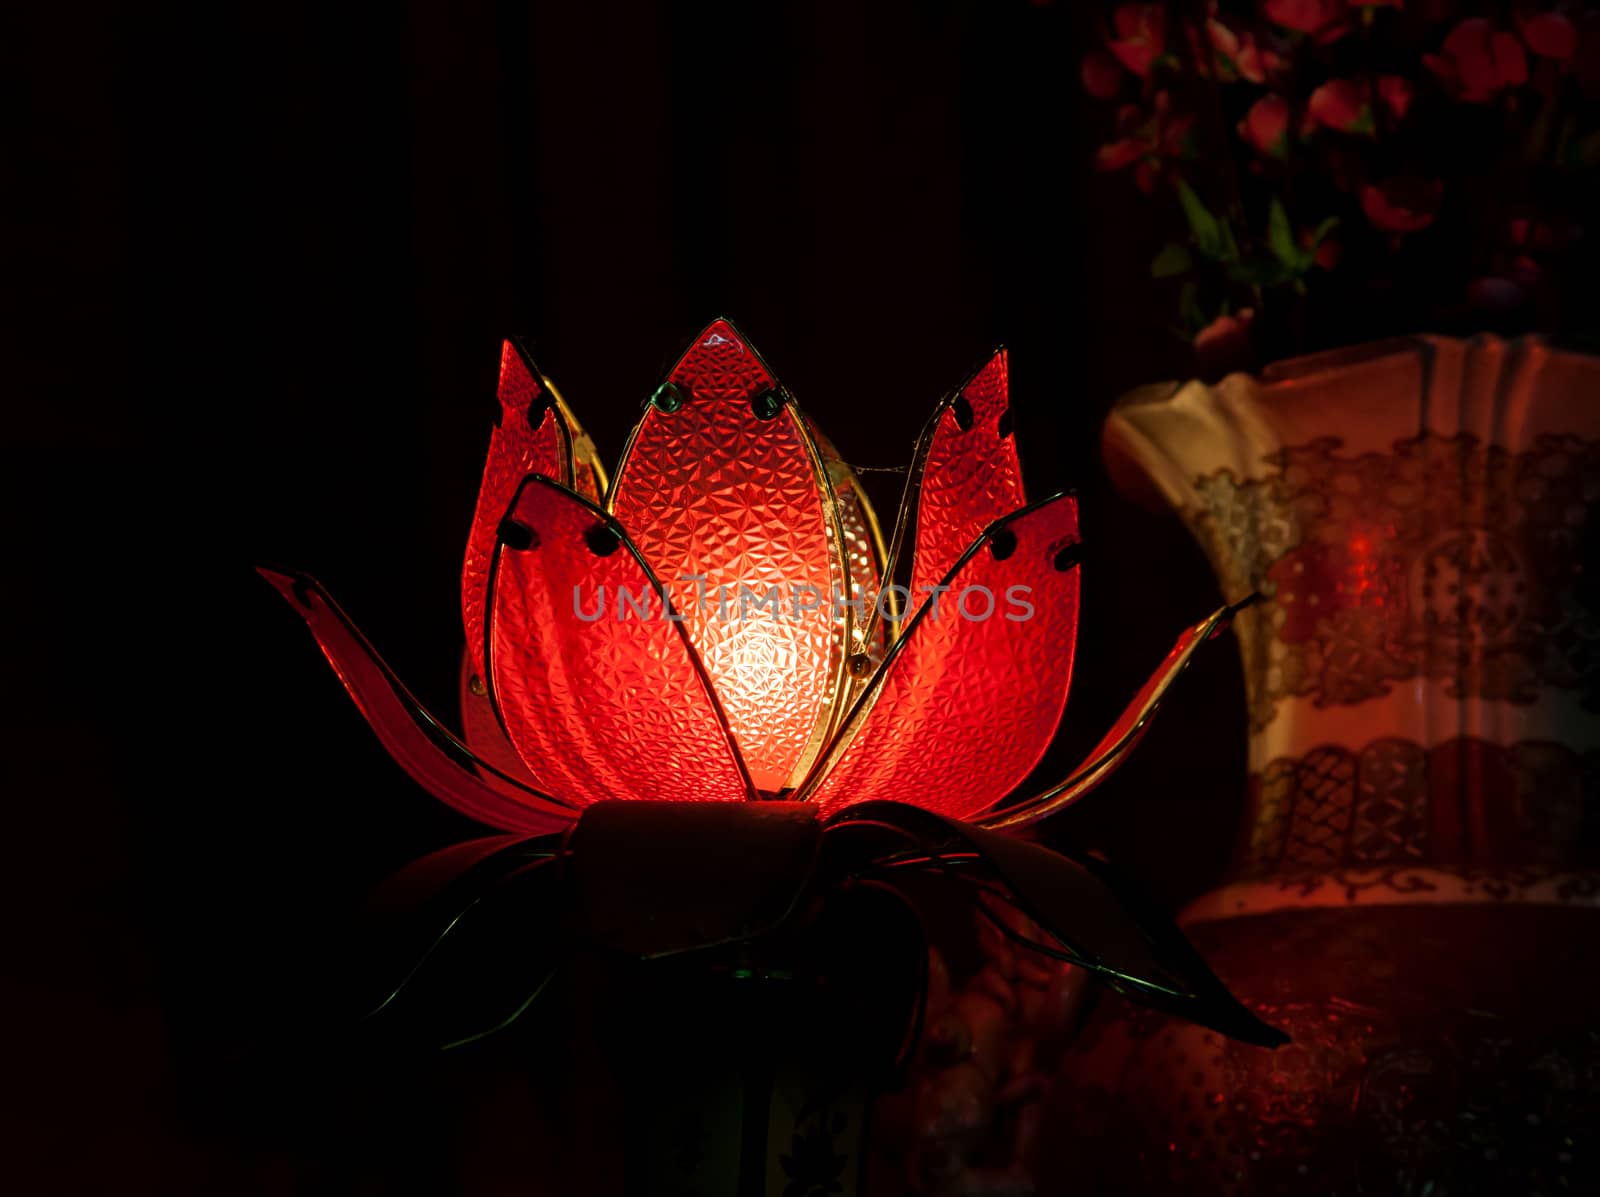 Lotus lamp in a darkness of a buddhist Temple, Vietnam